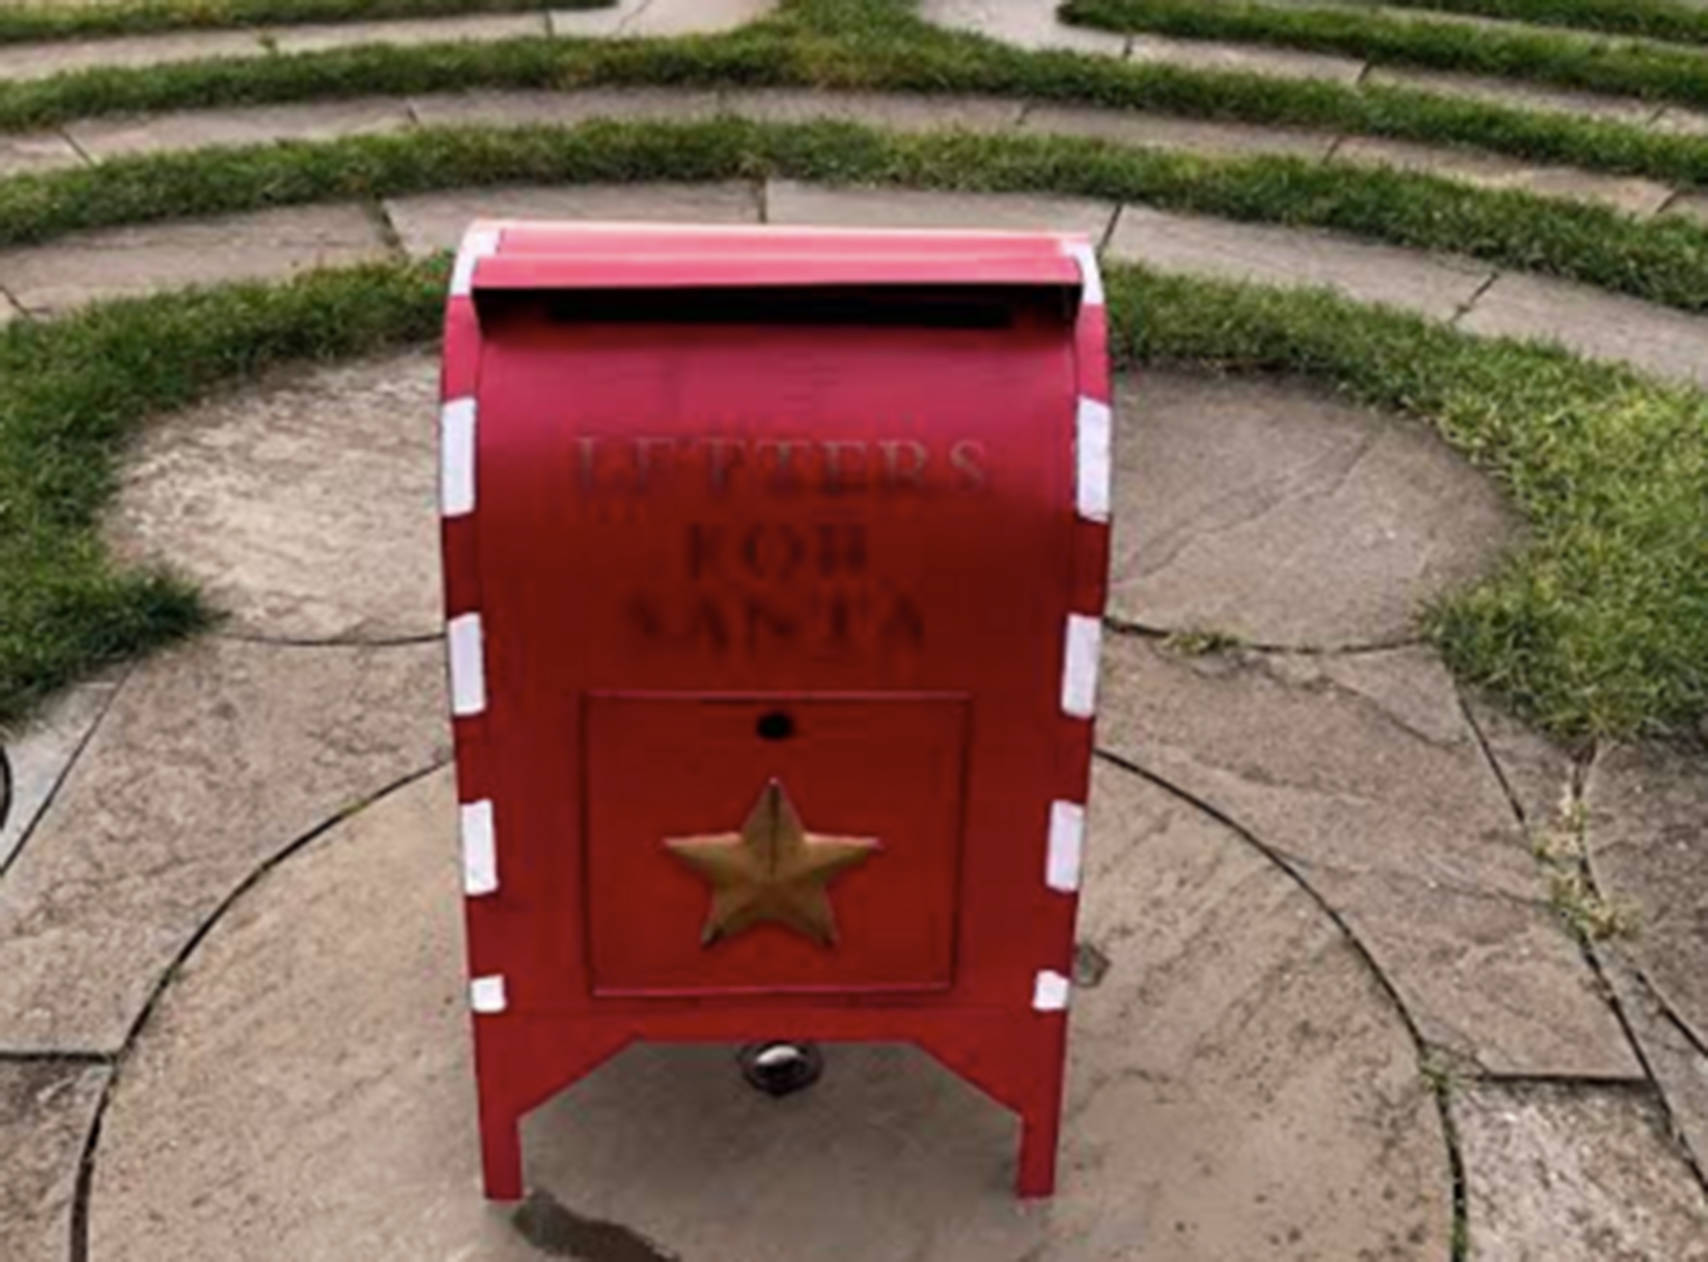 Contributed photo
Santa’s Letter Mailbox in the Labyrinth.